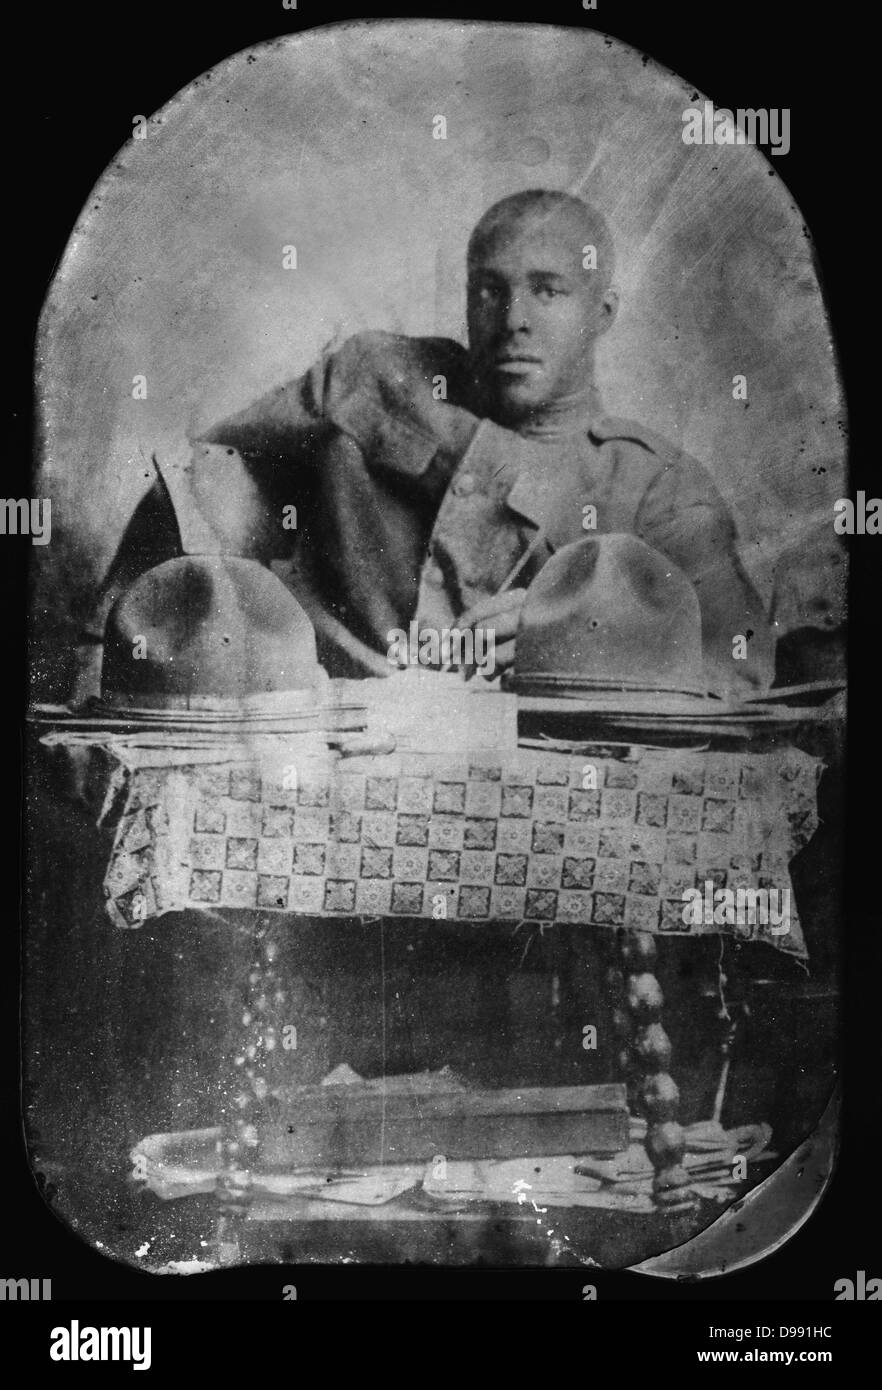 World War I 1914-1918: African-American soldier seated behind table, pencil in hand and facing front, with two hats on table. Stock Photo